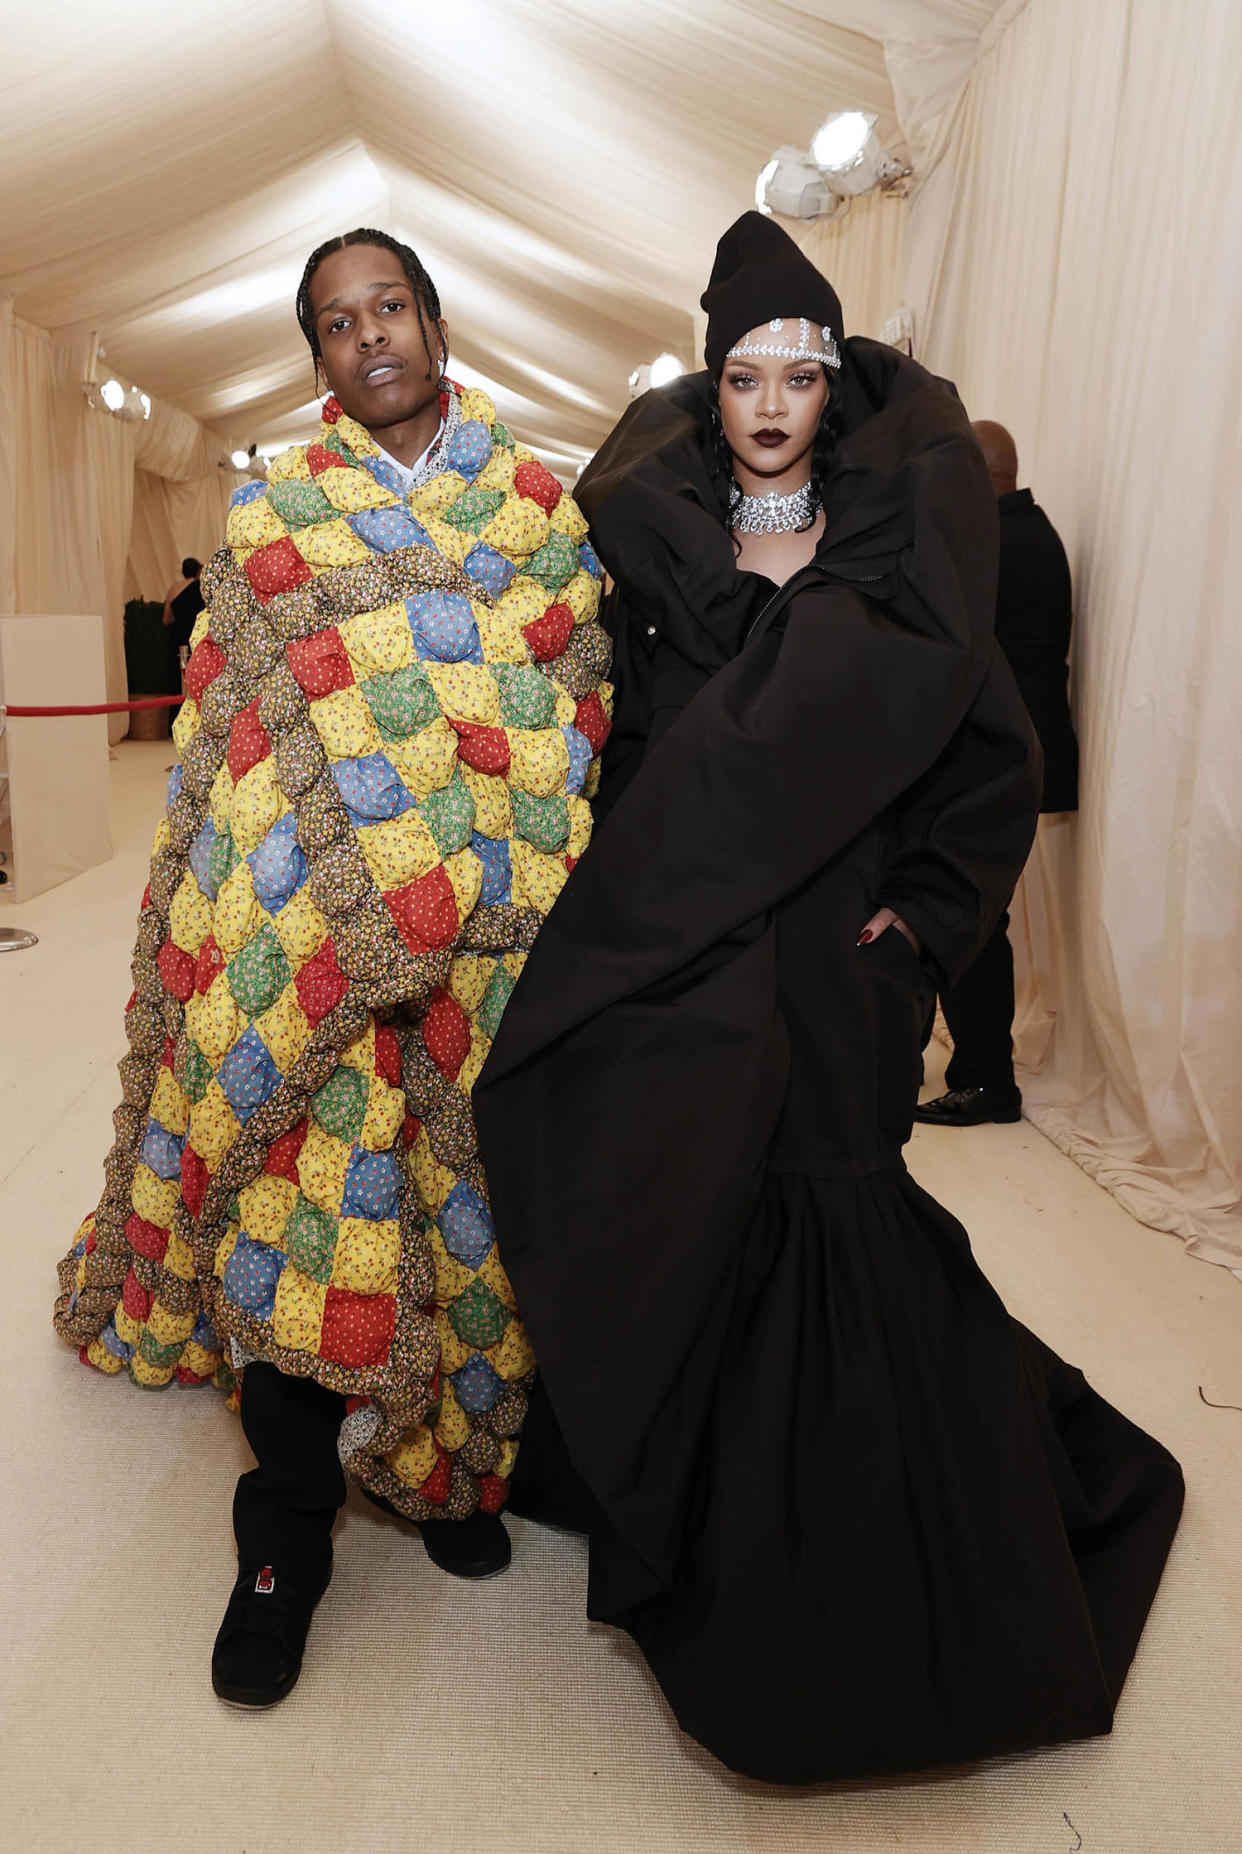 ASAP Rocky and Rihanna at the 2021 Met Gala (Arturo Holmes / Getty Images)